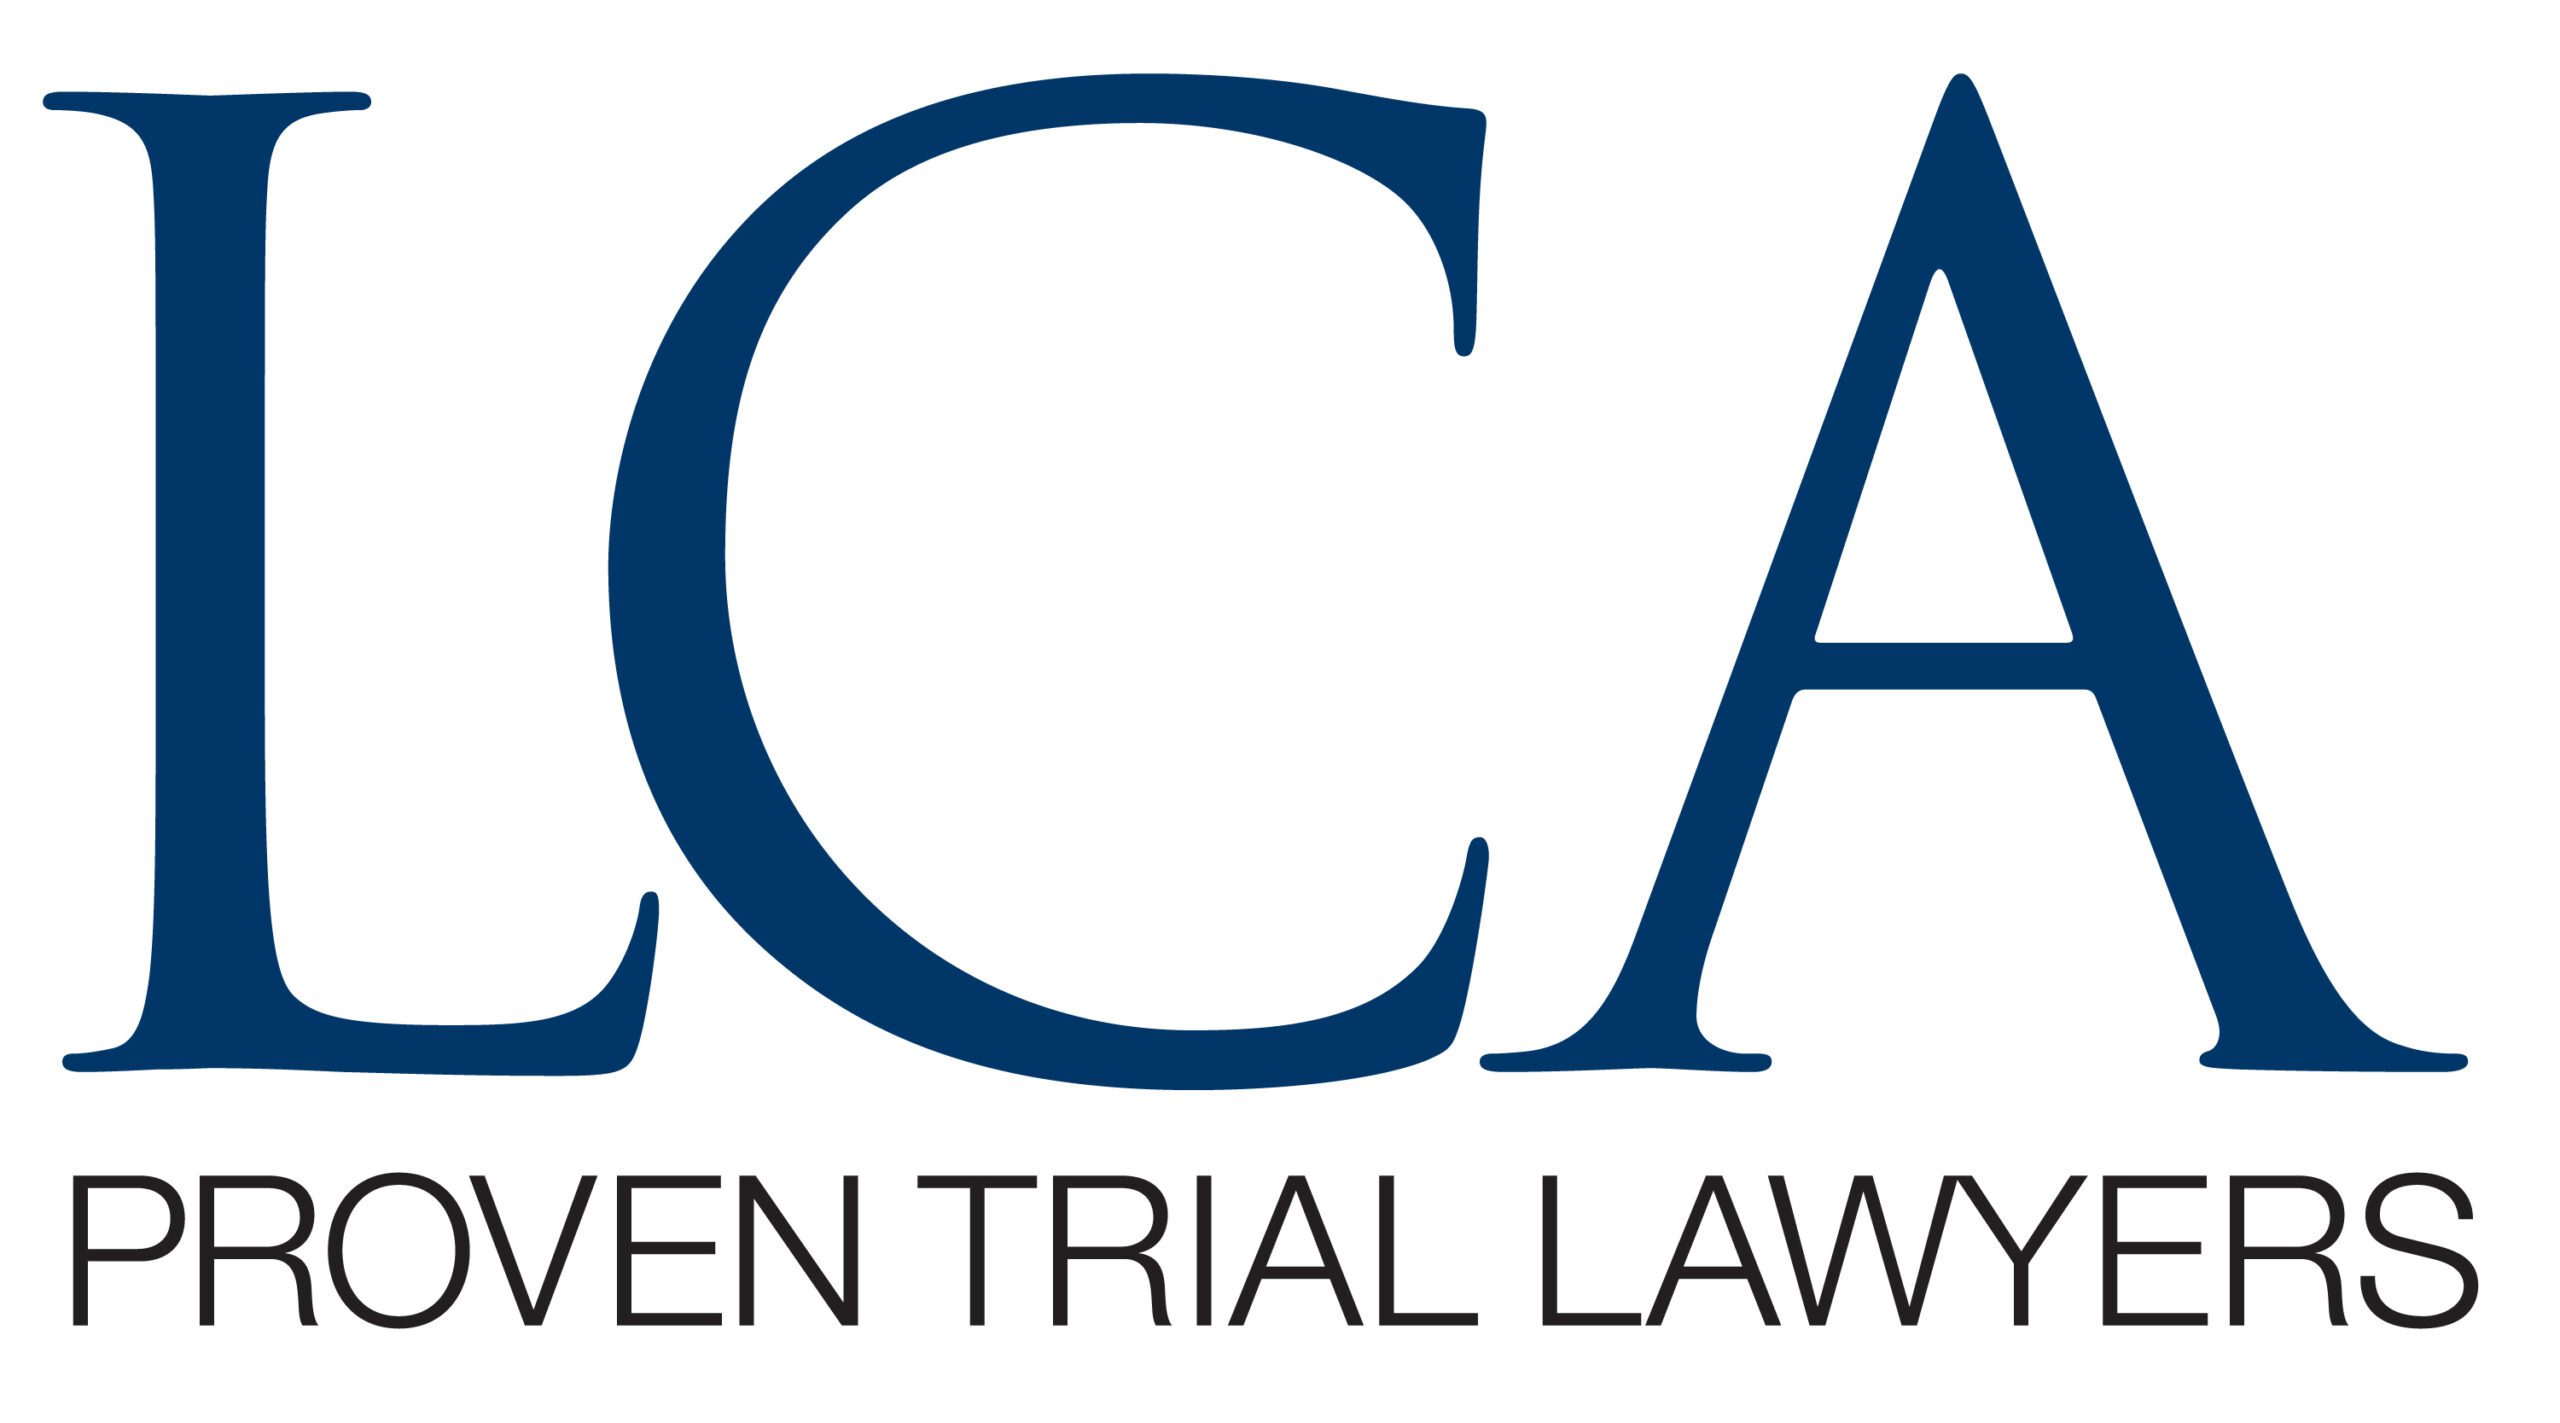 So, what’s the Litigation Counsel of America (LCA)?